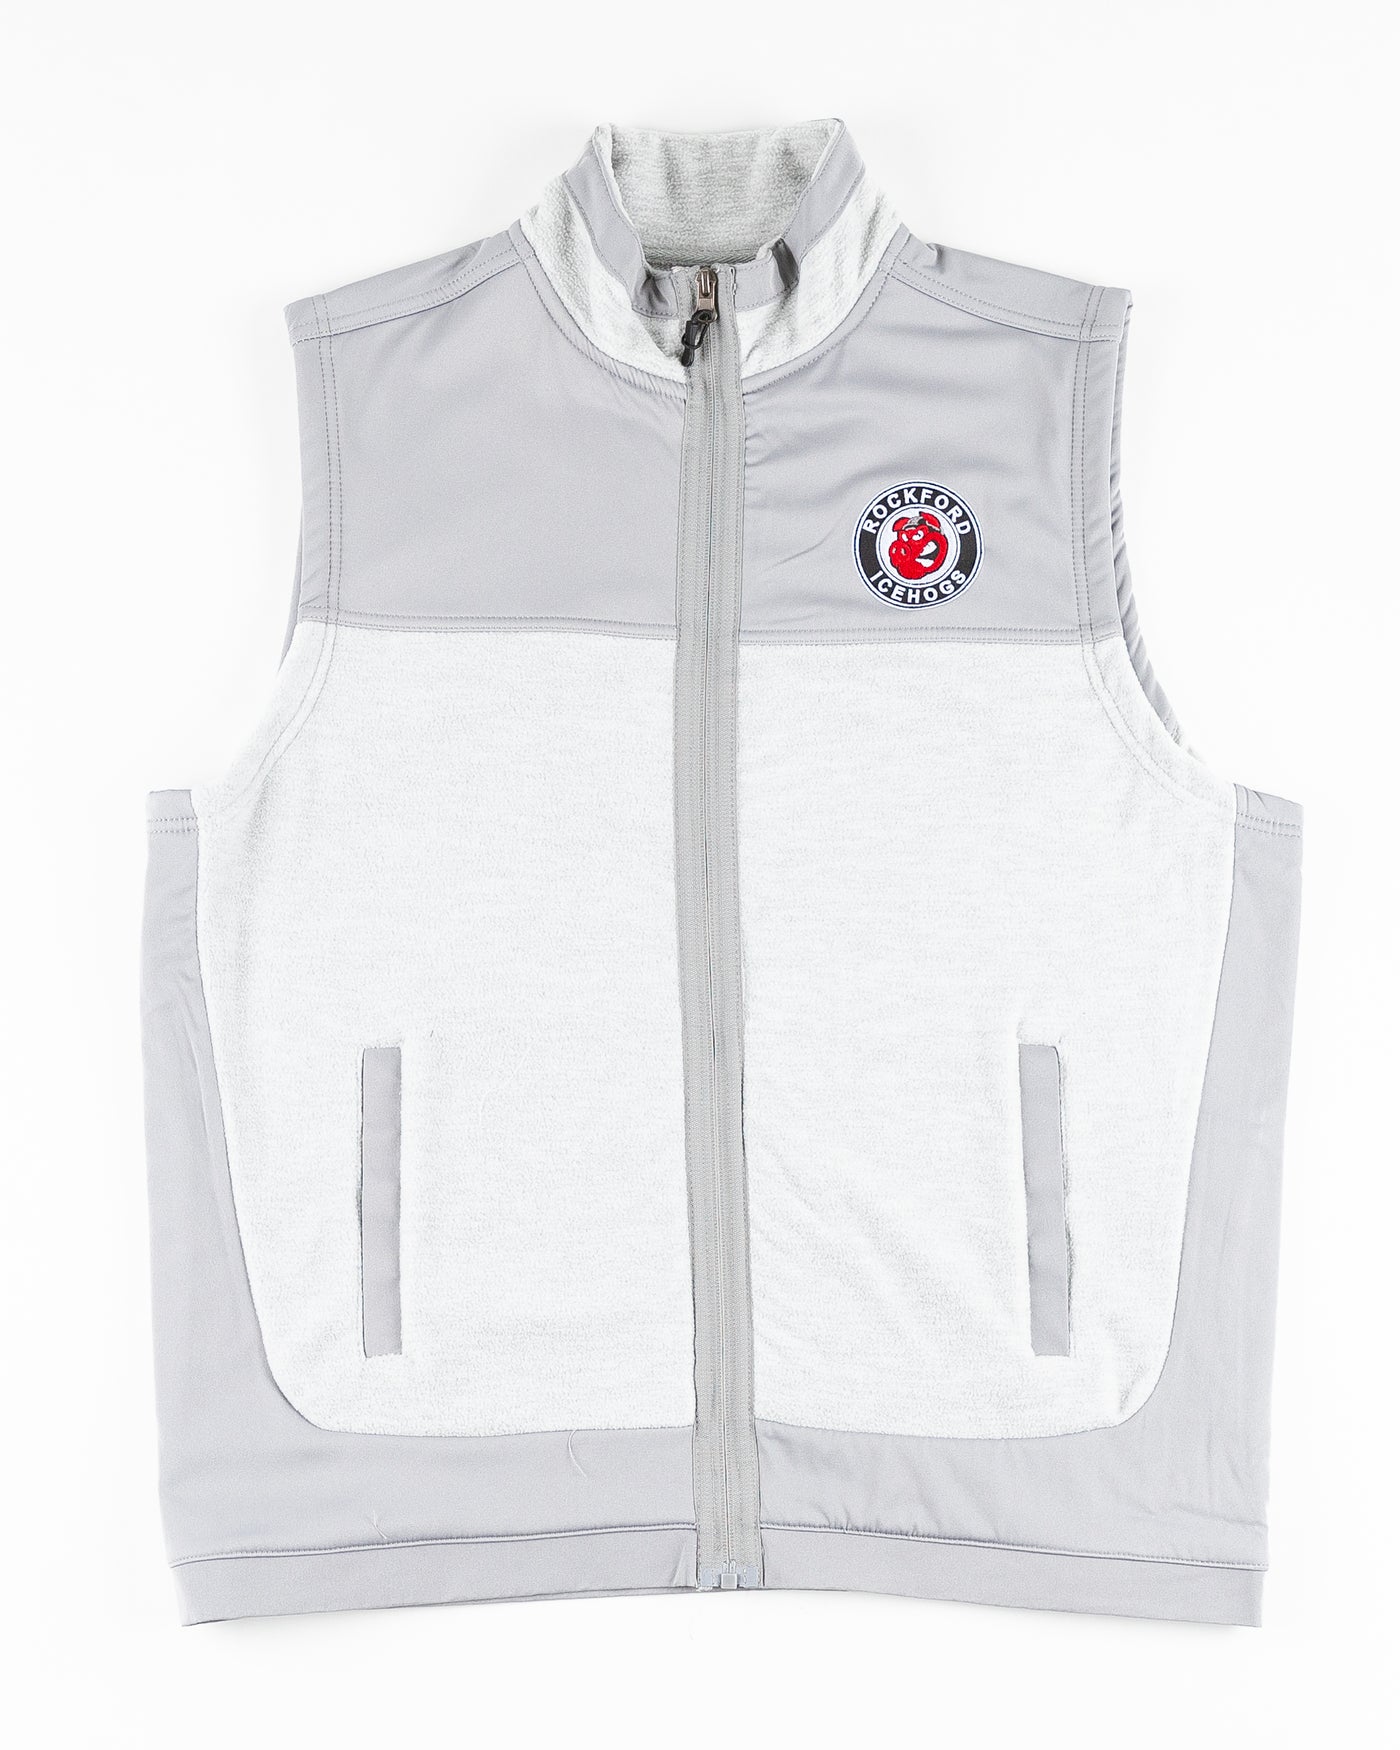 grey Colosseum vest with Rockford IceHogs patch embroidered on left chest - front lay flat